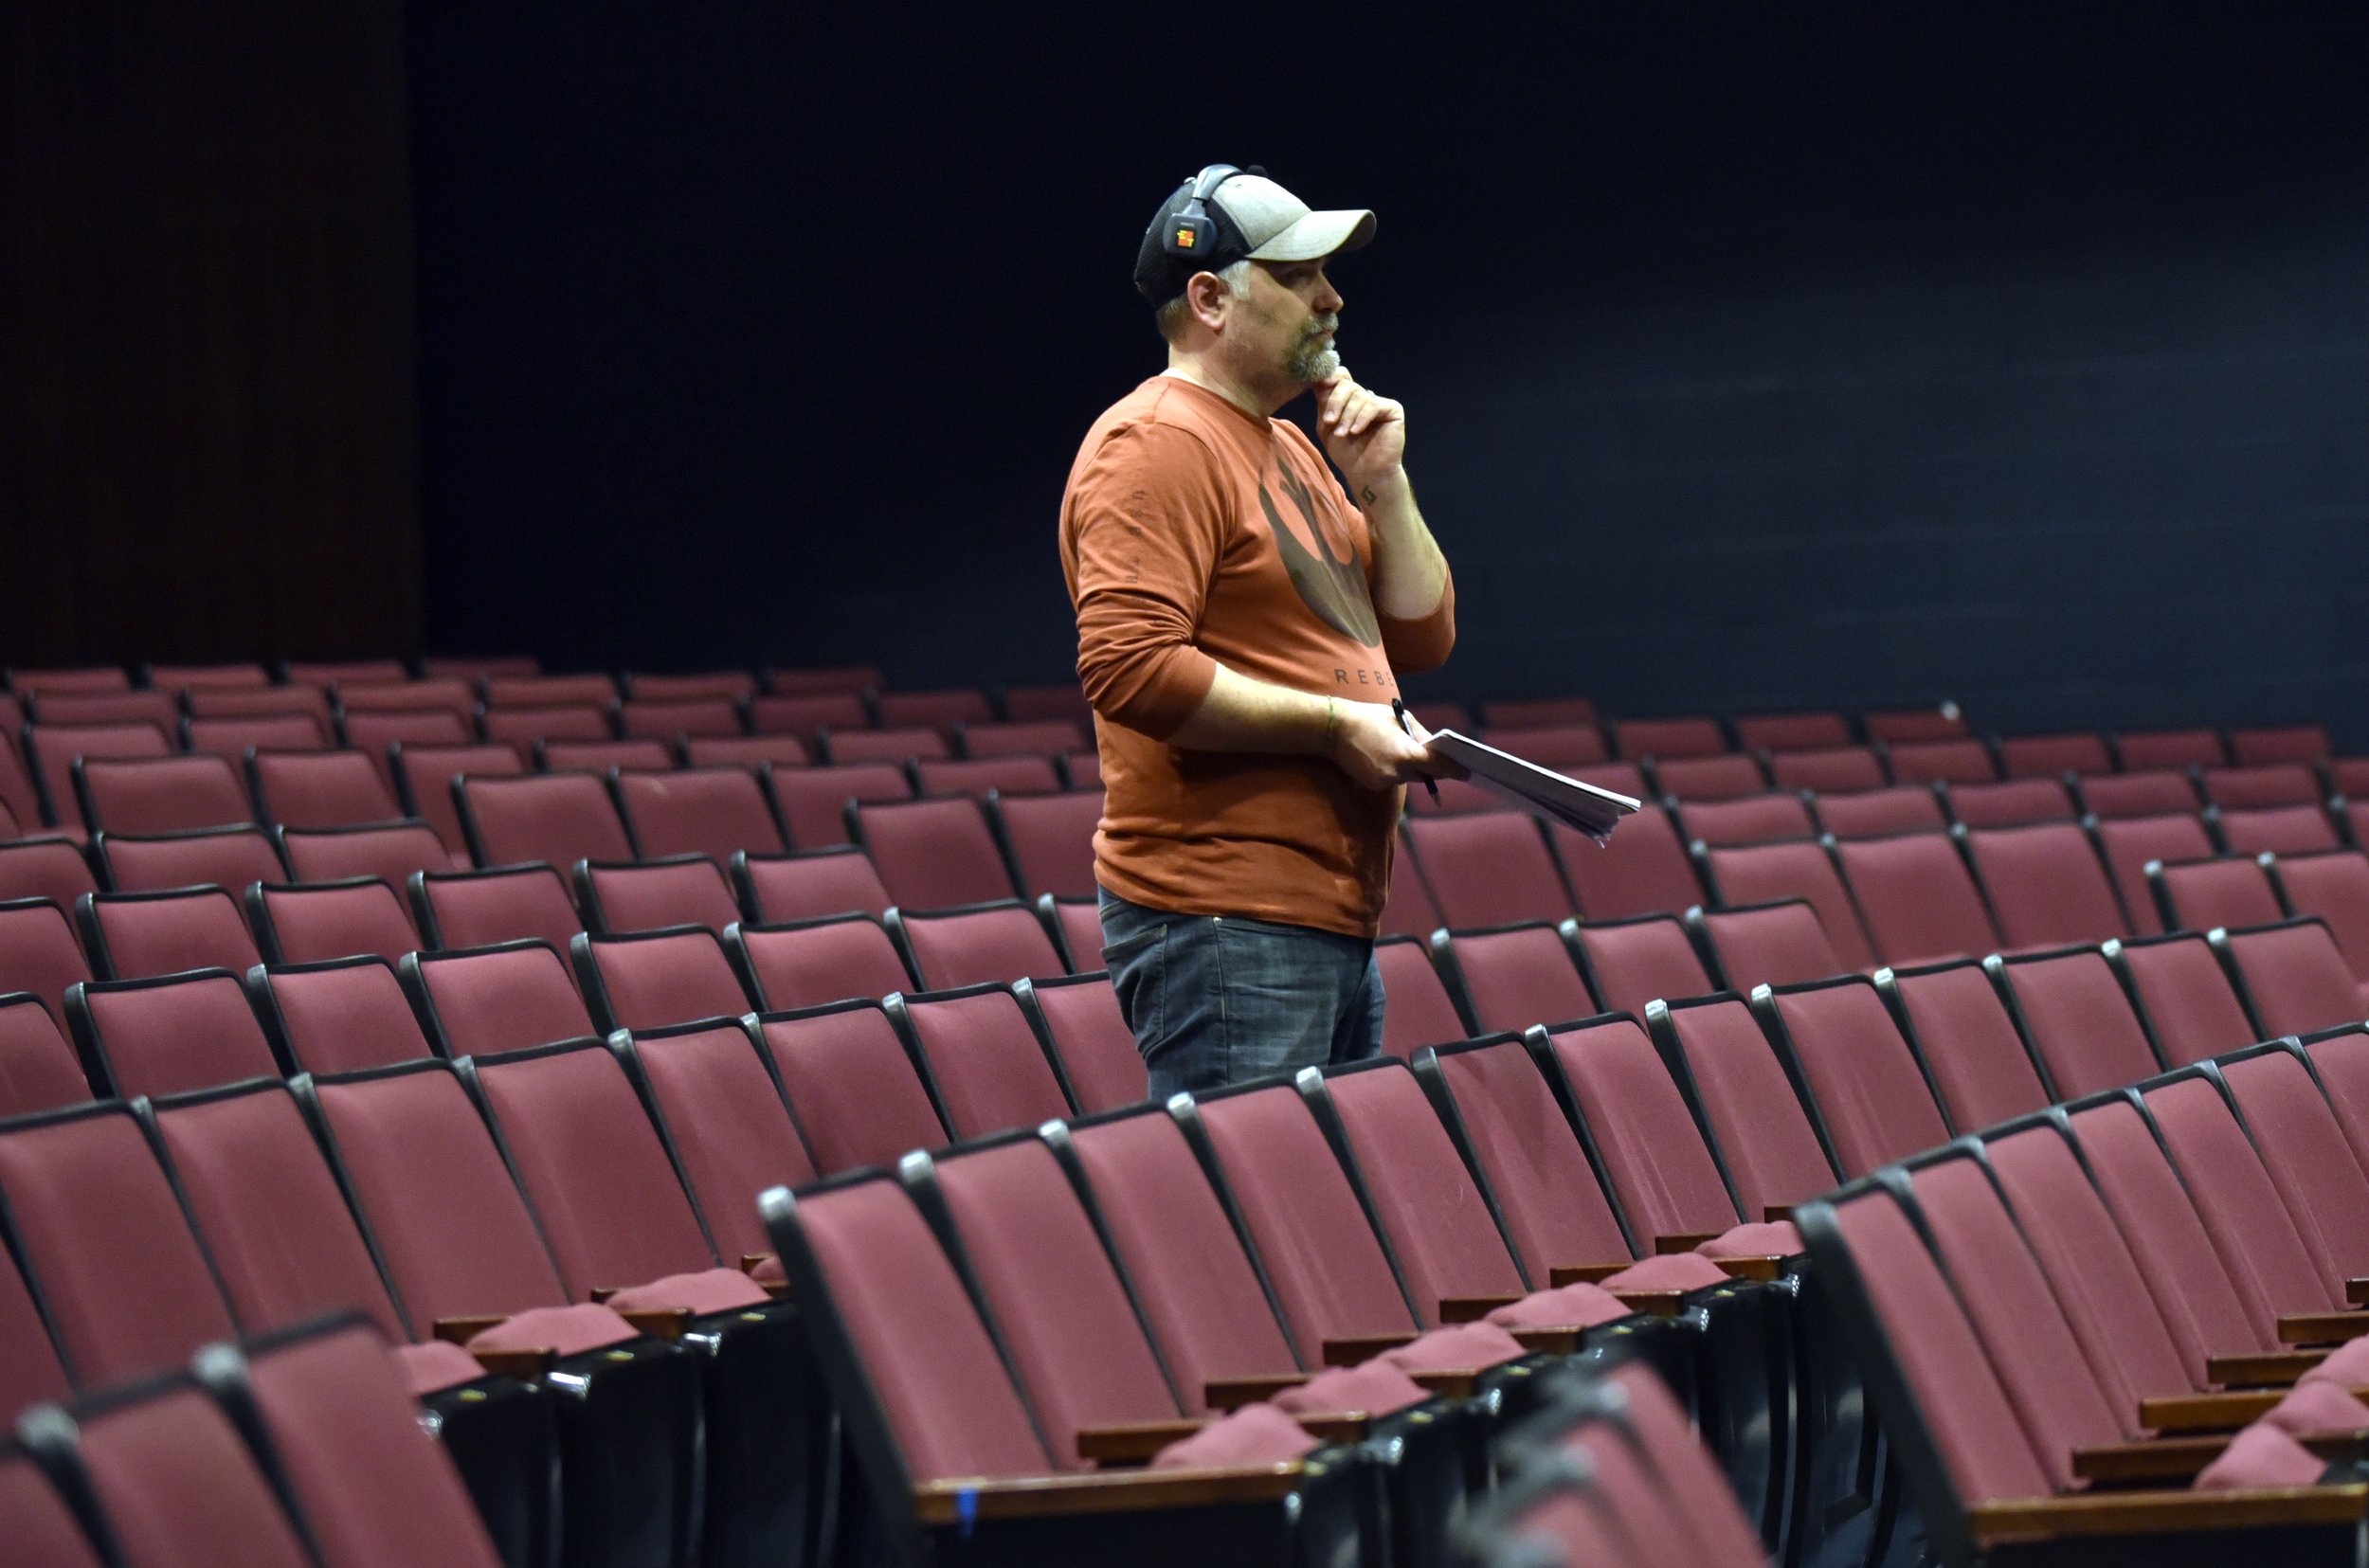   Director Scott Weigand takes in the scene from the auditorium seats. Photo by Gordon Miller  